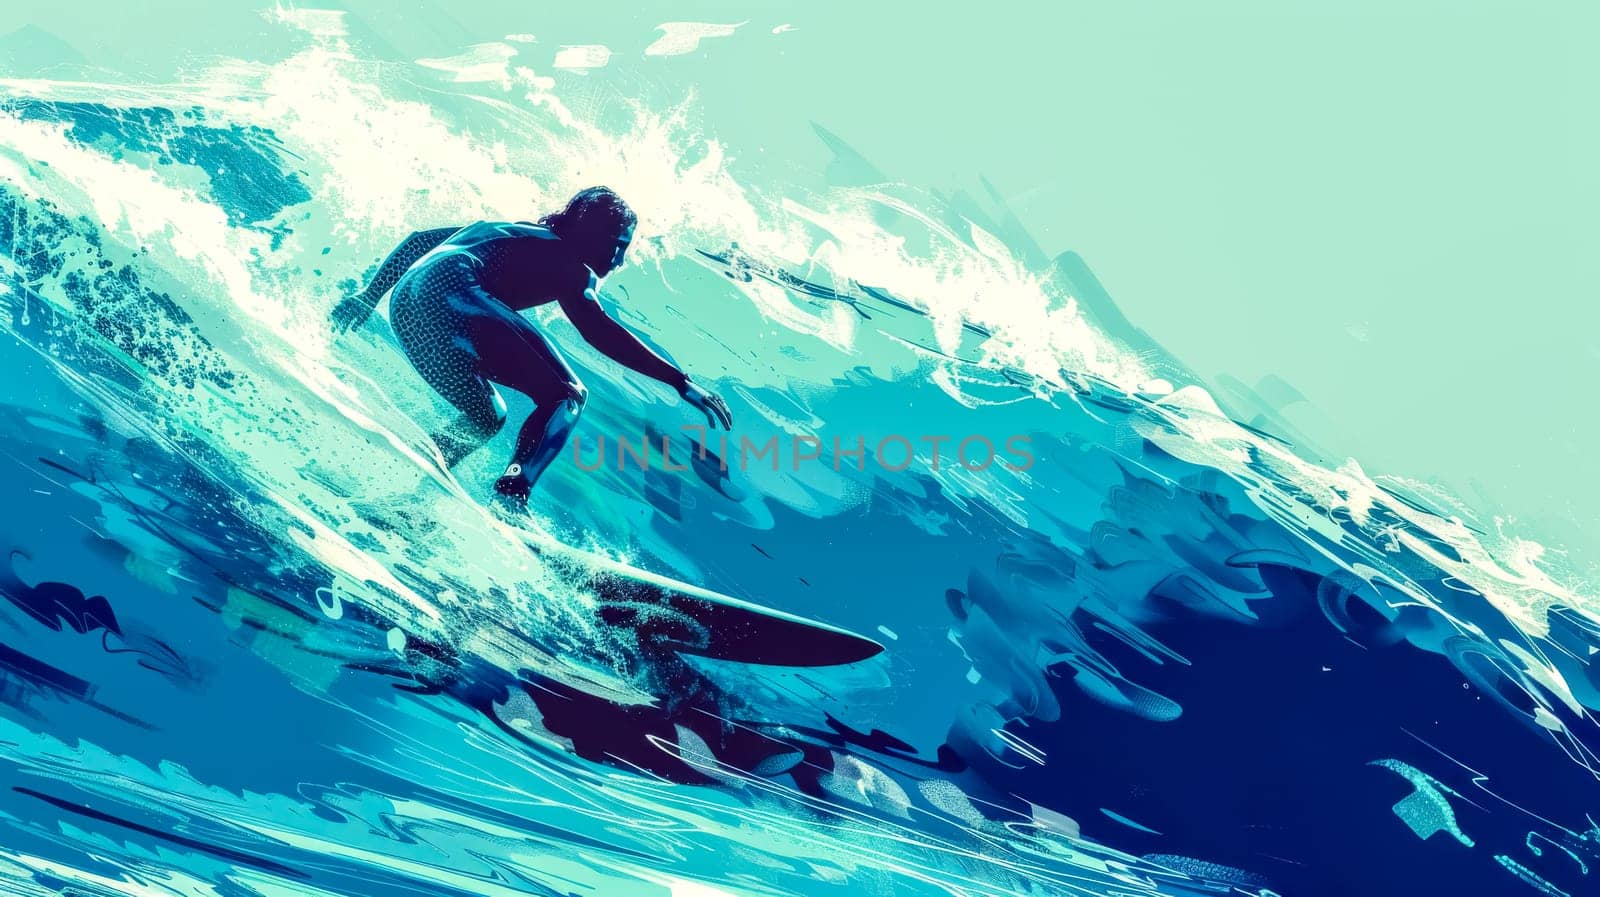 Illustration of an athlete surfing a cresting wave, capturing the movement and energy of water sports